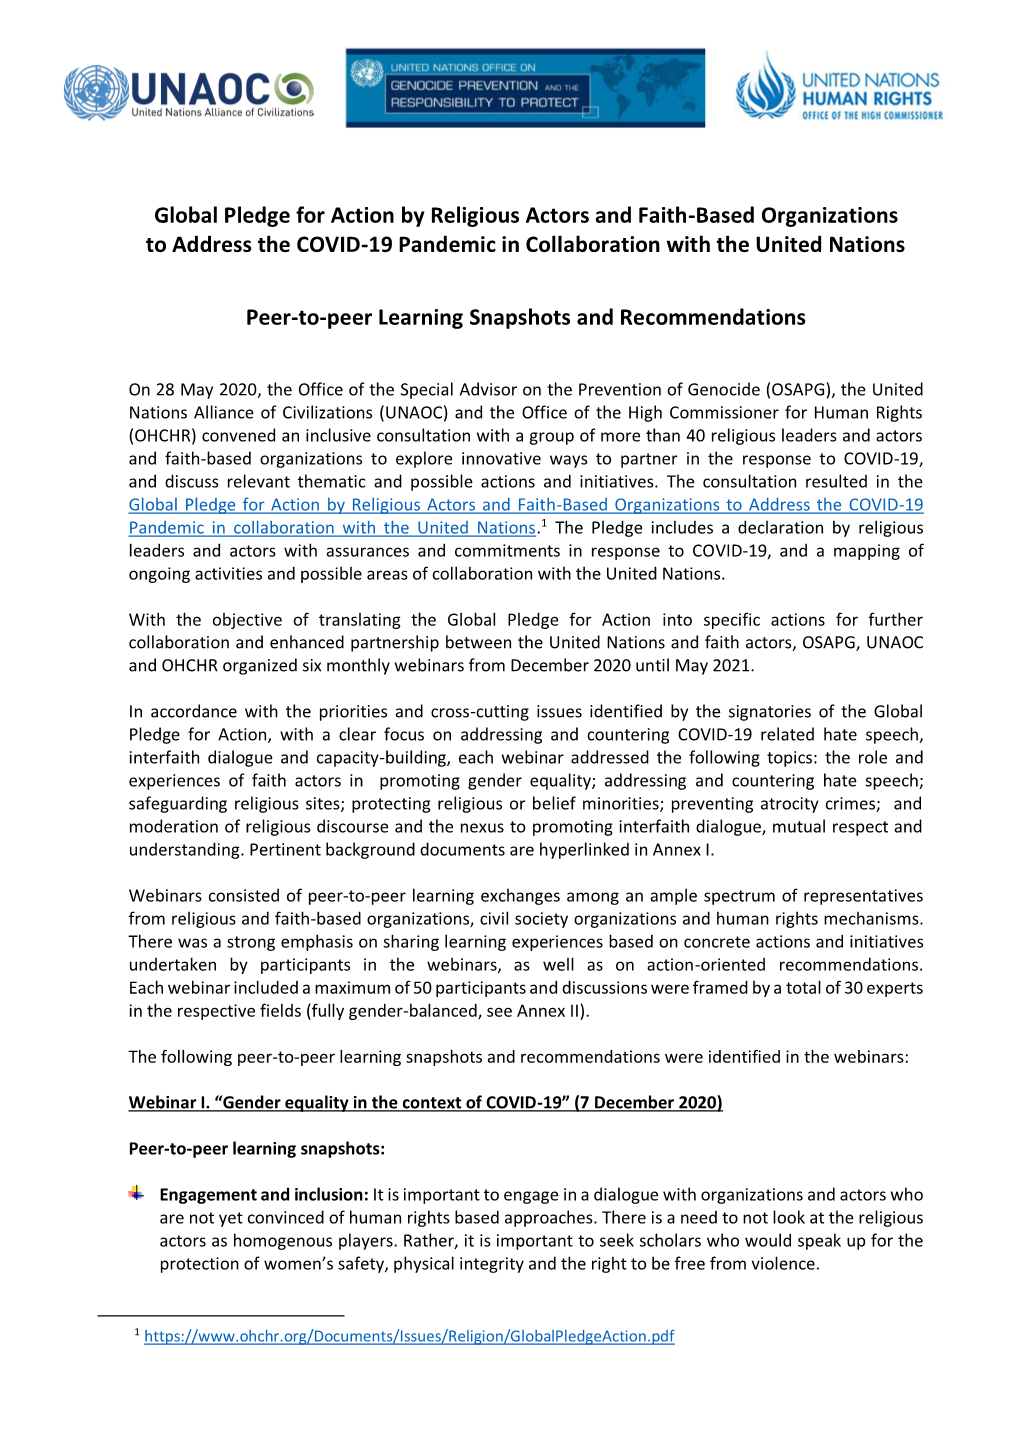 Global Pledge for Action by Religious Actors and Faith-Based Organizations to Address the COVID-19 Pandemic in Collaboration with the United Nations